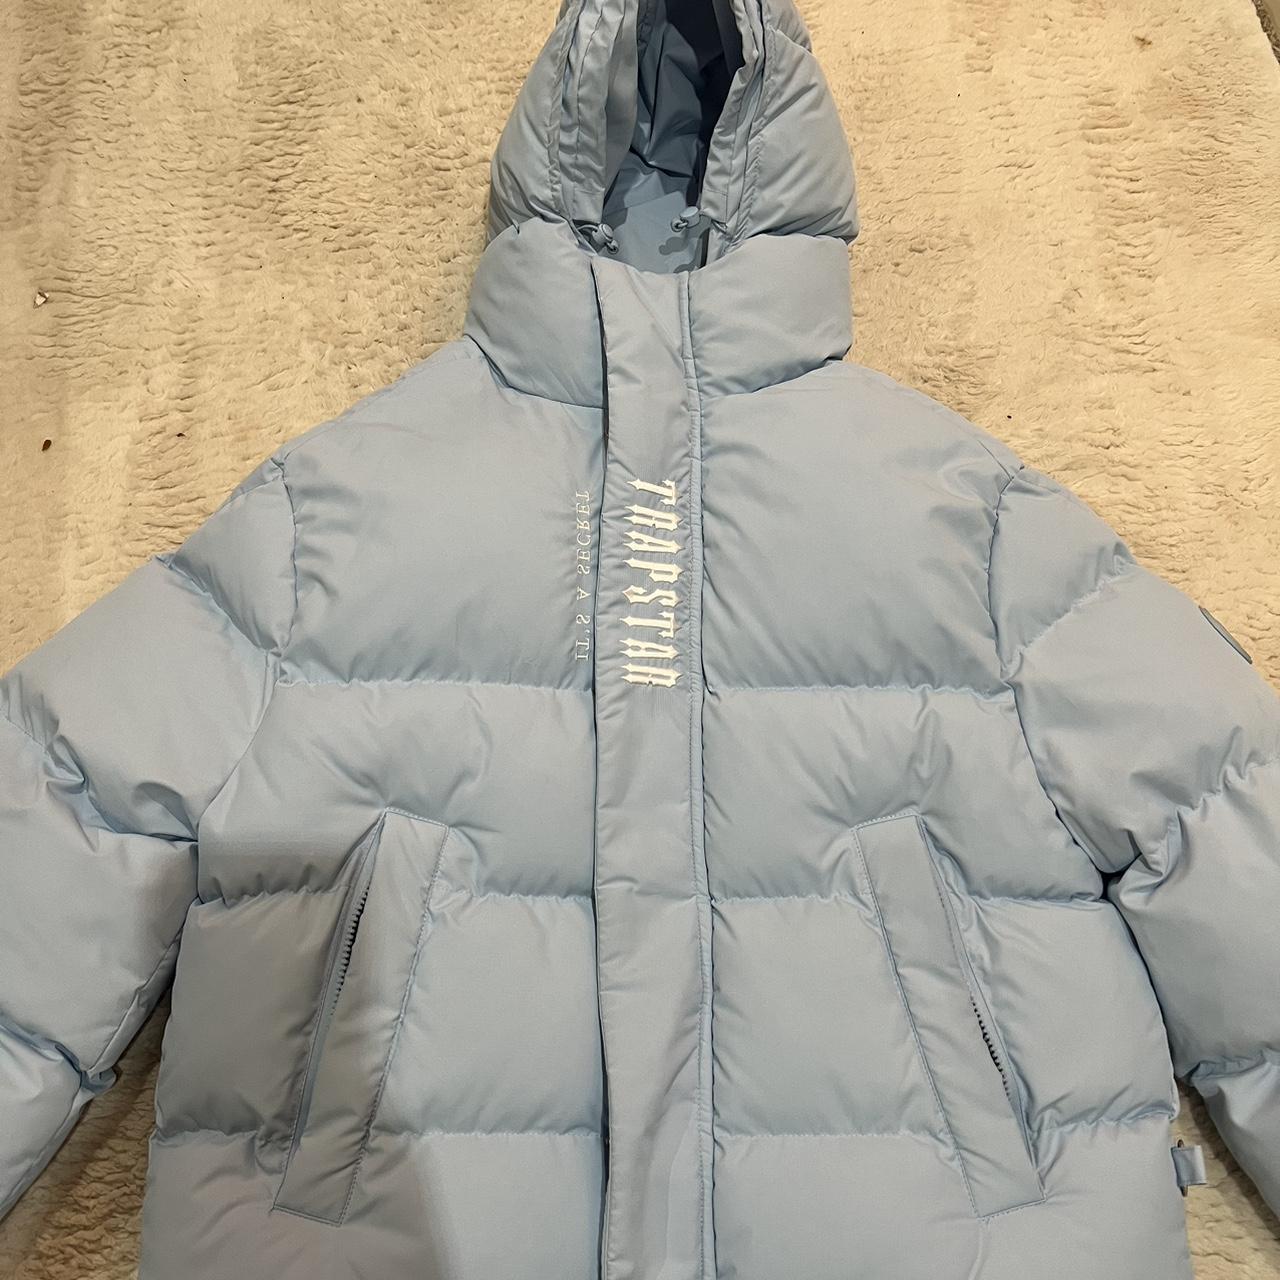 Trapstar Decoded Hooded Puffer 2.0 Ice Blue